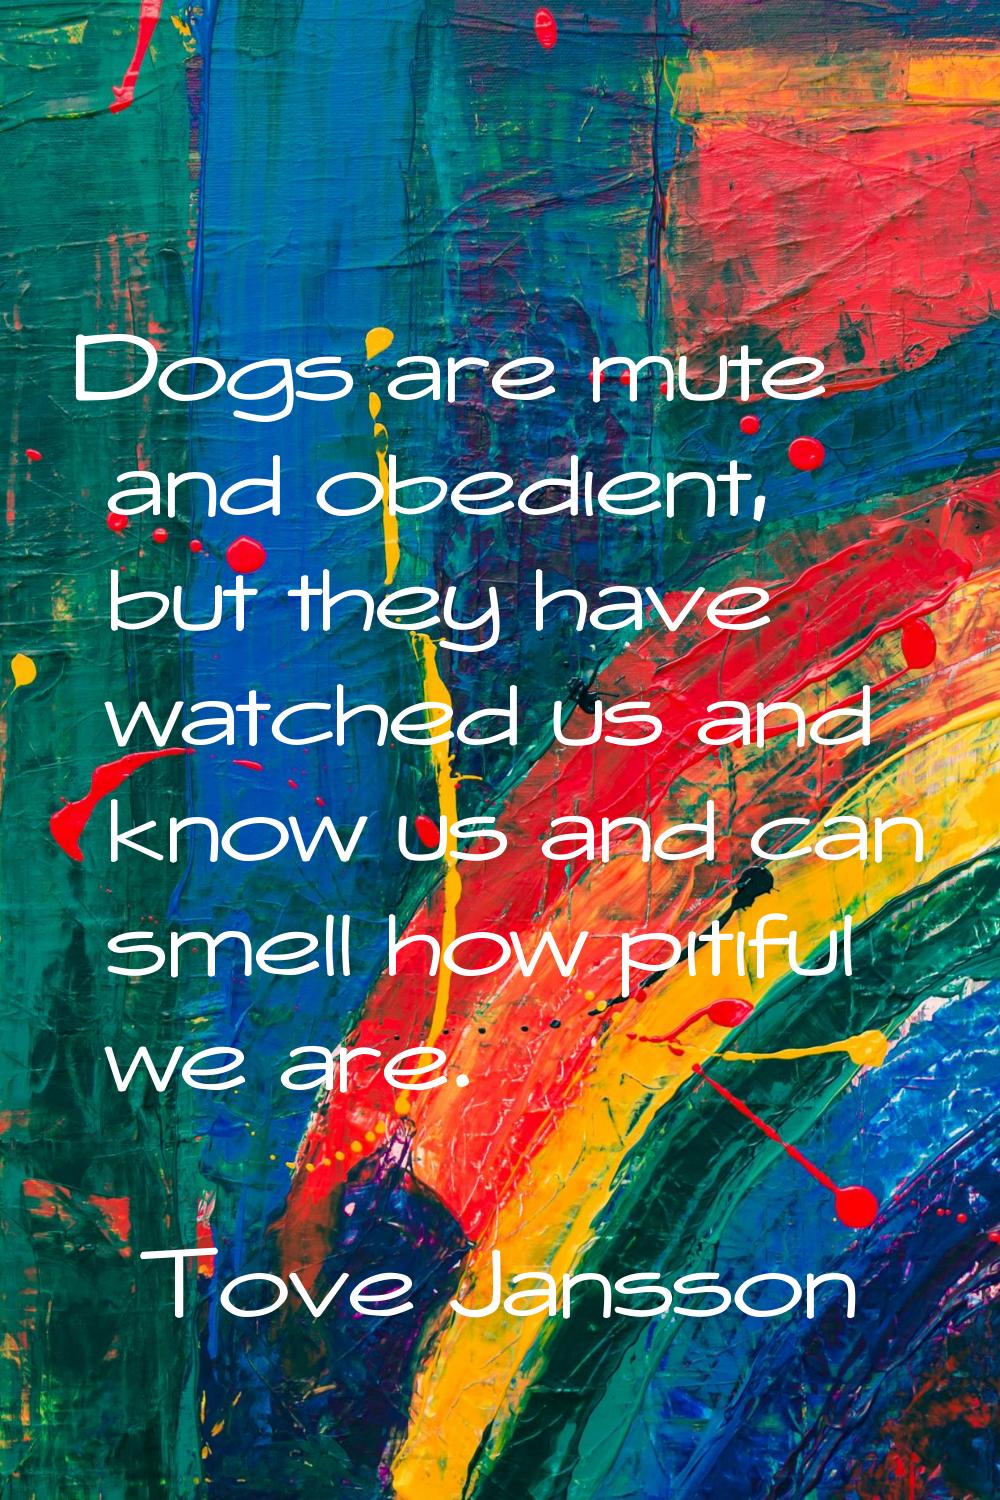 Dogs are mute and obedient, but they have watched us and know us and can smell how pitiful we are.